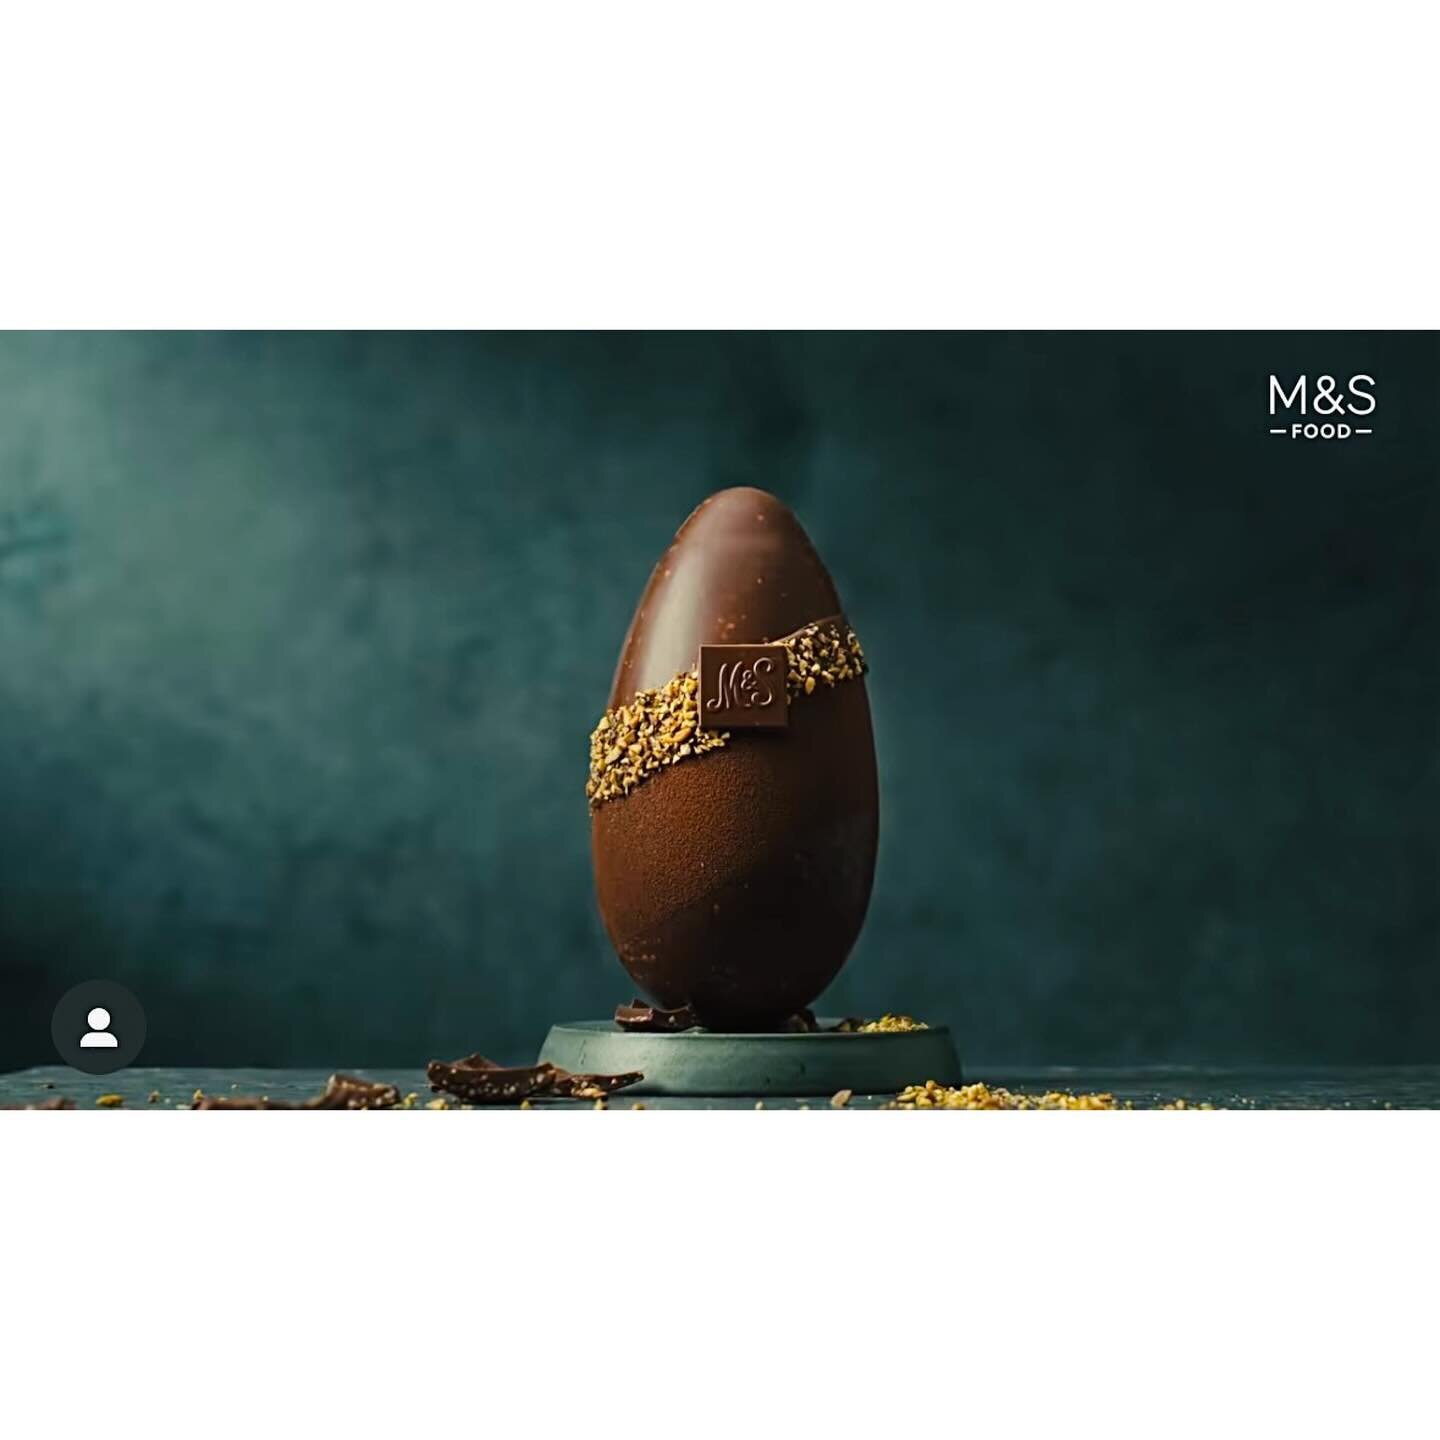 Some stills &amp; BTS from our Easter ad for @marksandspencerfood @thebitecollective 
🥚🍫🐰🐣❎🍔
Shot at @claphamstudios 
Dir @scottpeters @thatsdetail 
Producer &amp; Hands @kellymocho 
Props @pennyprops 
Repped by @style_department 

#foodstyling 